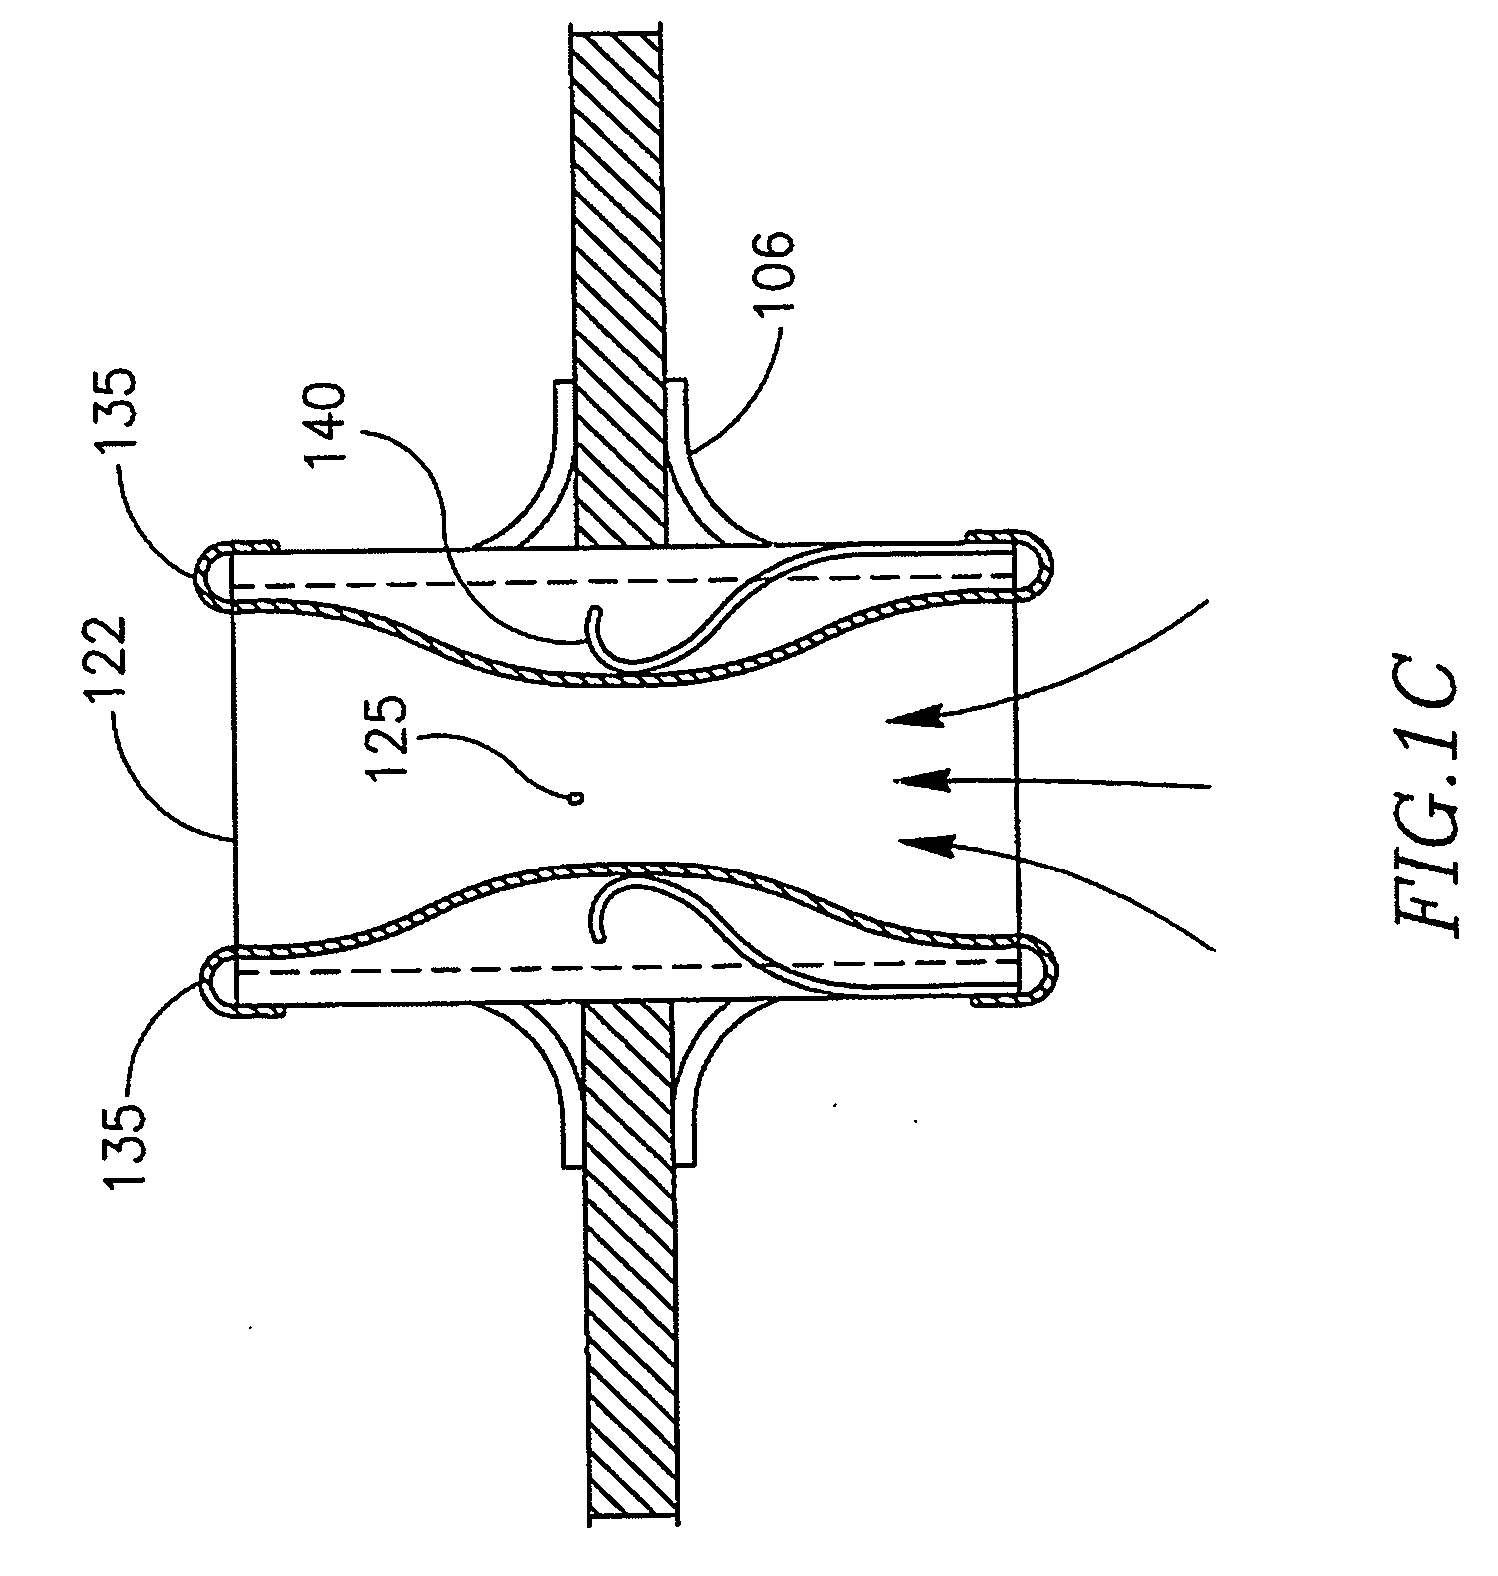 Device and method for controlling in-vivo pressure